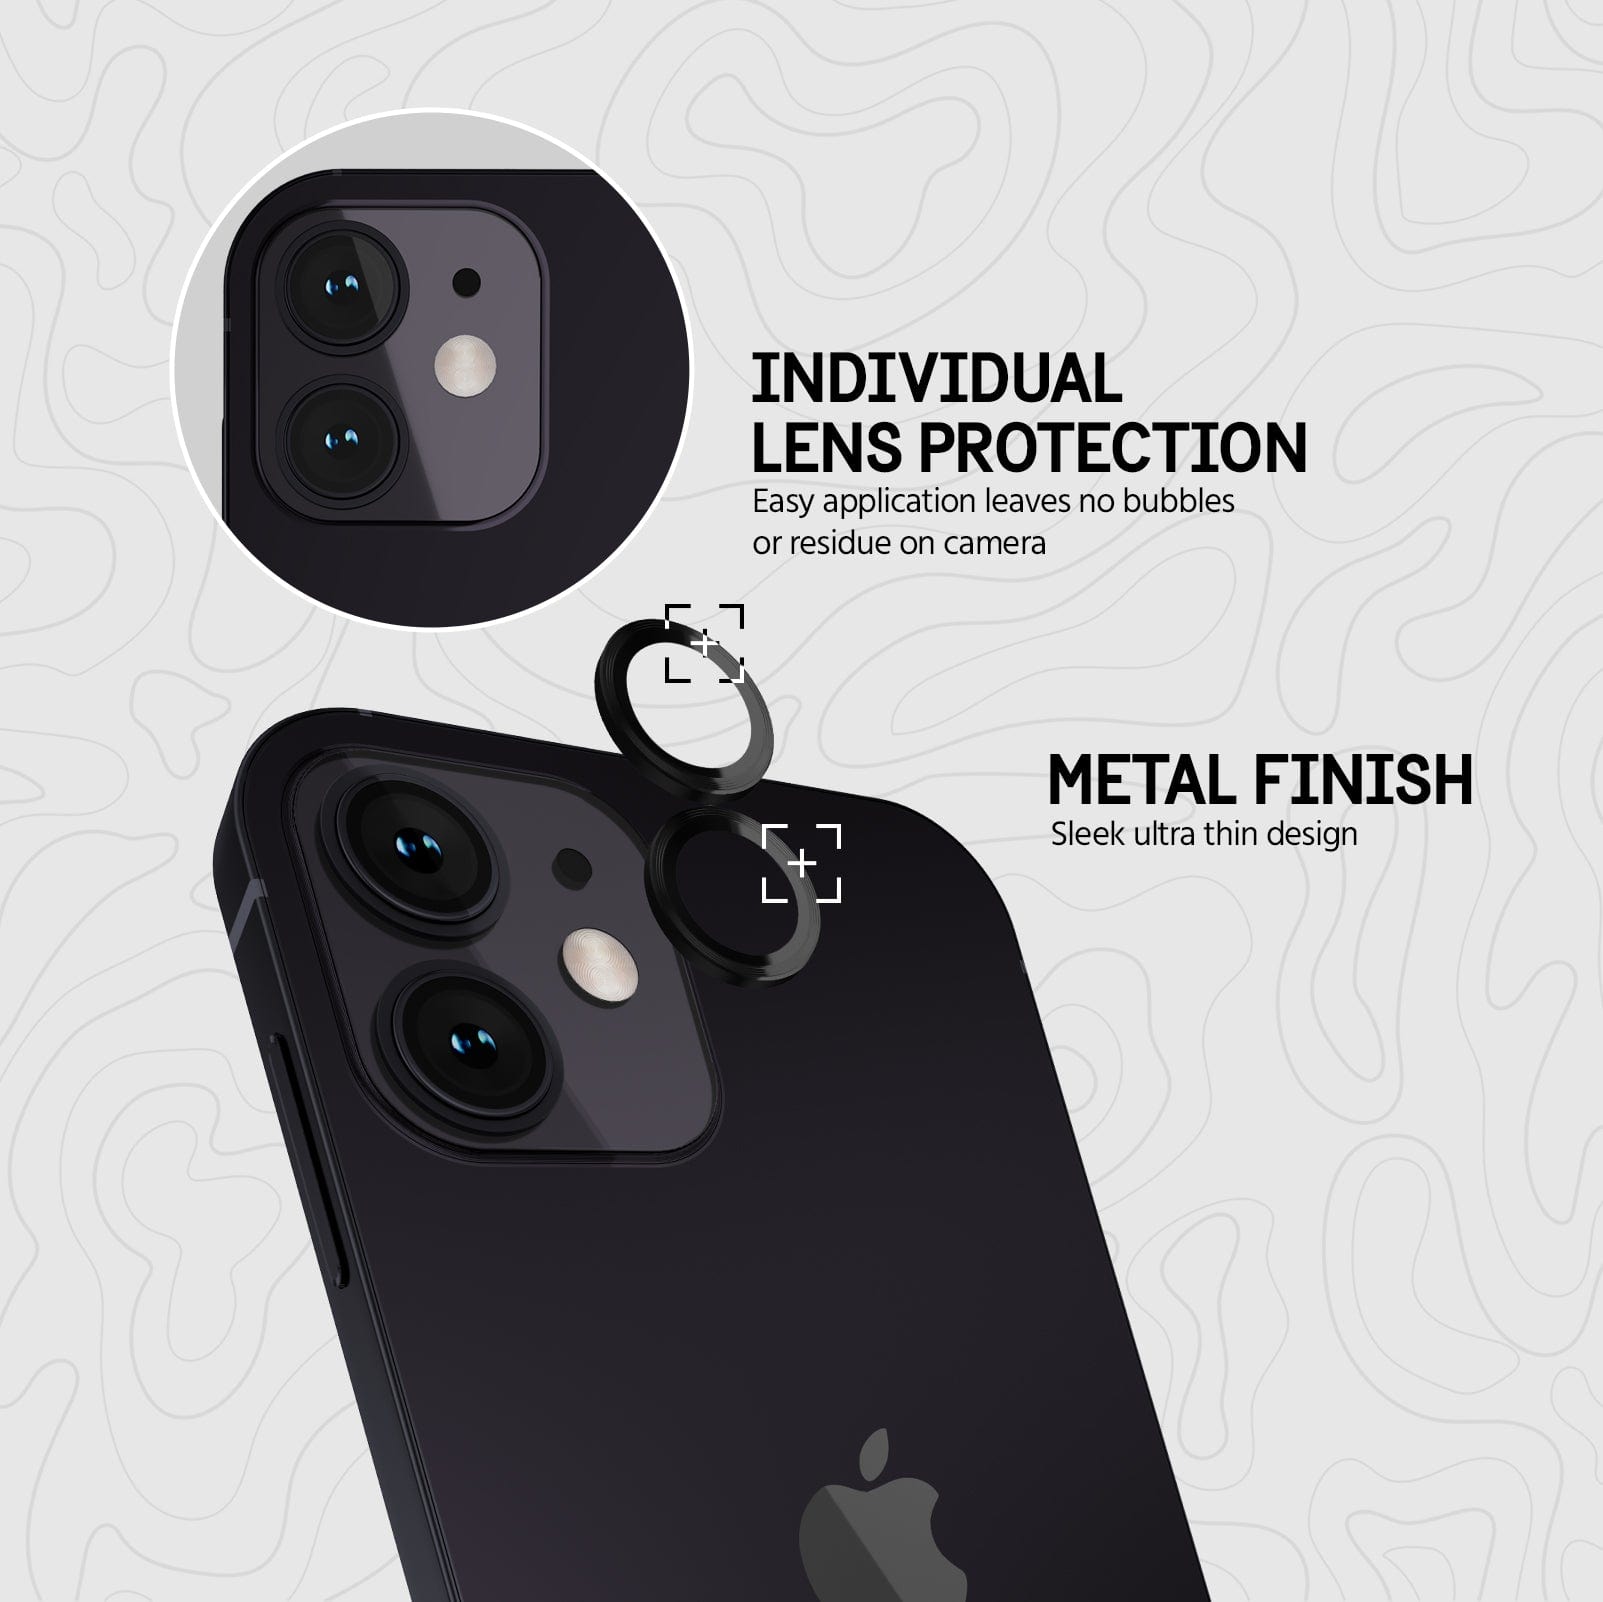 INDIVIDUAL LENS PROTECTION. EASY APPLICATION LEAVES NO BUBBLES OR RESIDUE ON CAMERA. METAL FINISH. SLEEK ULTRA THIN DESIGN.